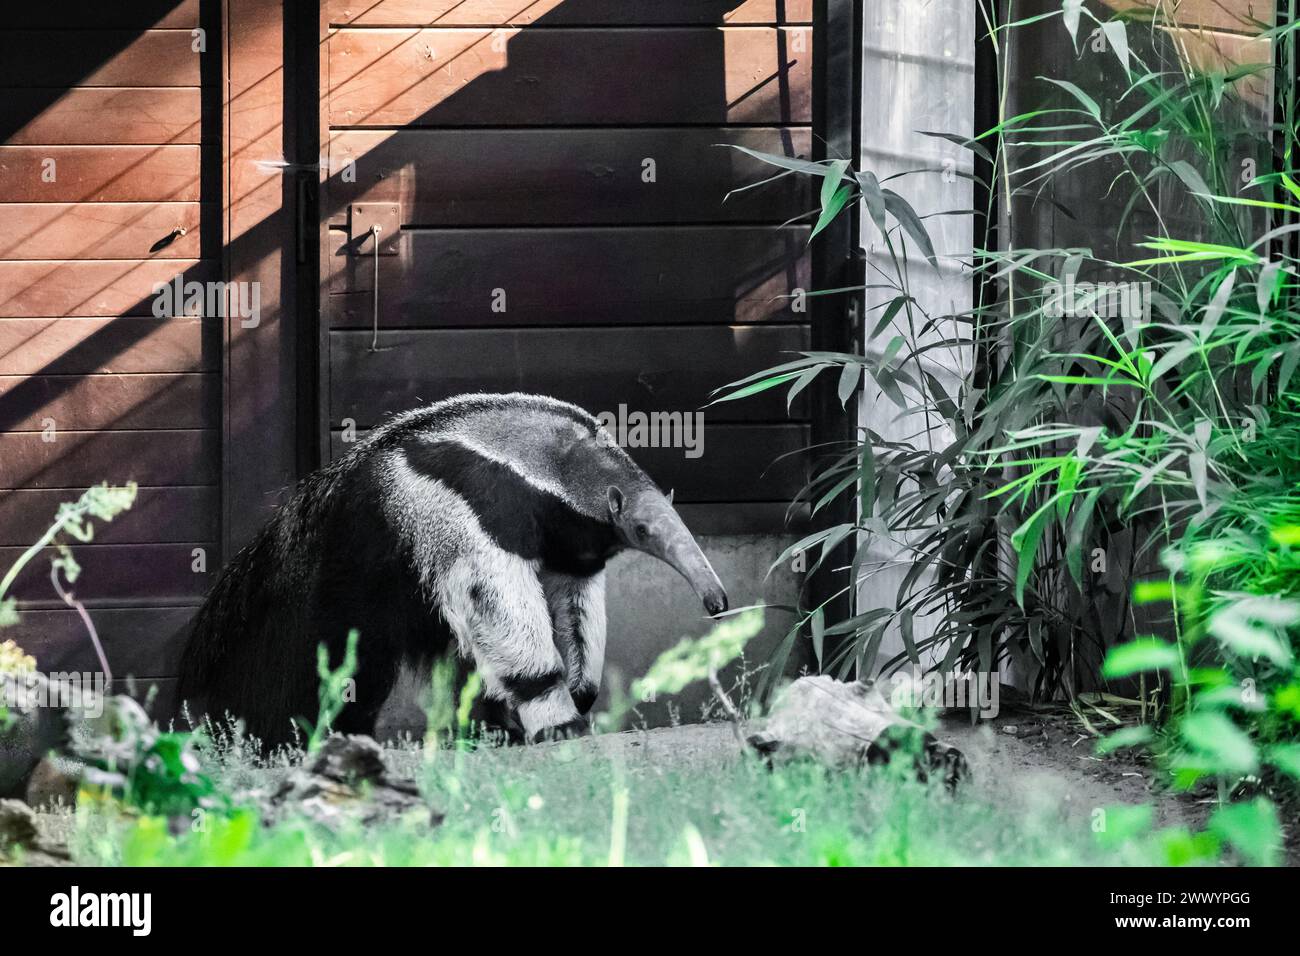 Myrmecophaga tridactyla, Giant anteater. large shaggy animal with long nose walks through grass. Protecting rare animals in European zoos Stock Photo